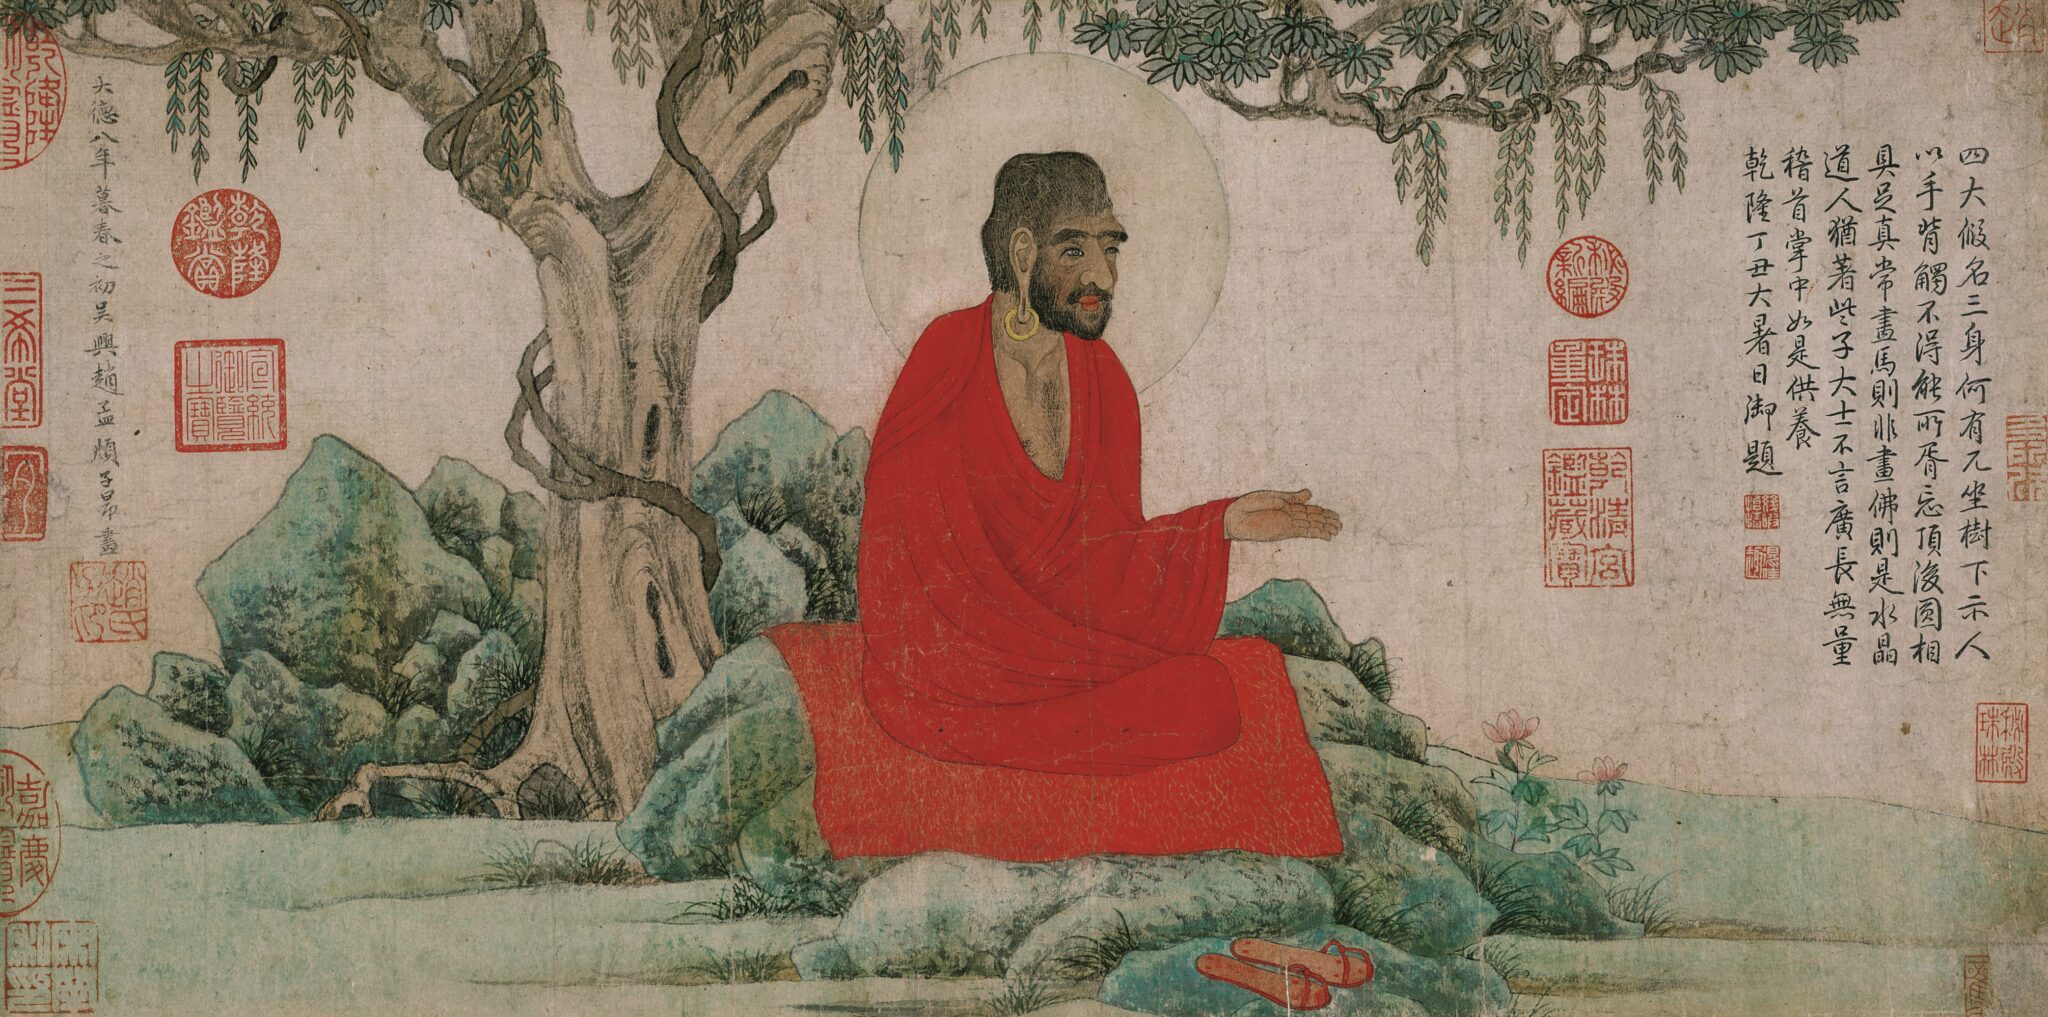 Holy man wearing brilliant red robe seated on green outcropping underneath tree; flanked by Chinese text and seals